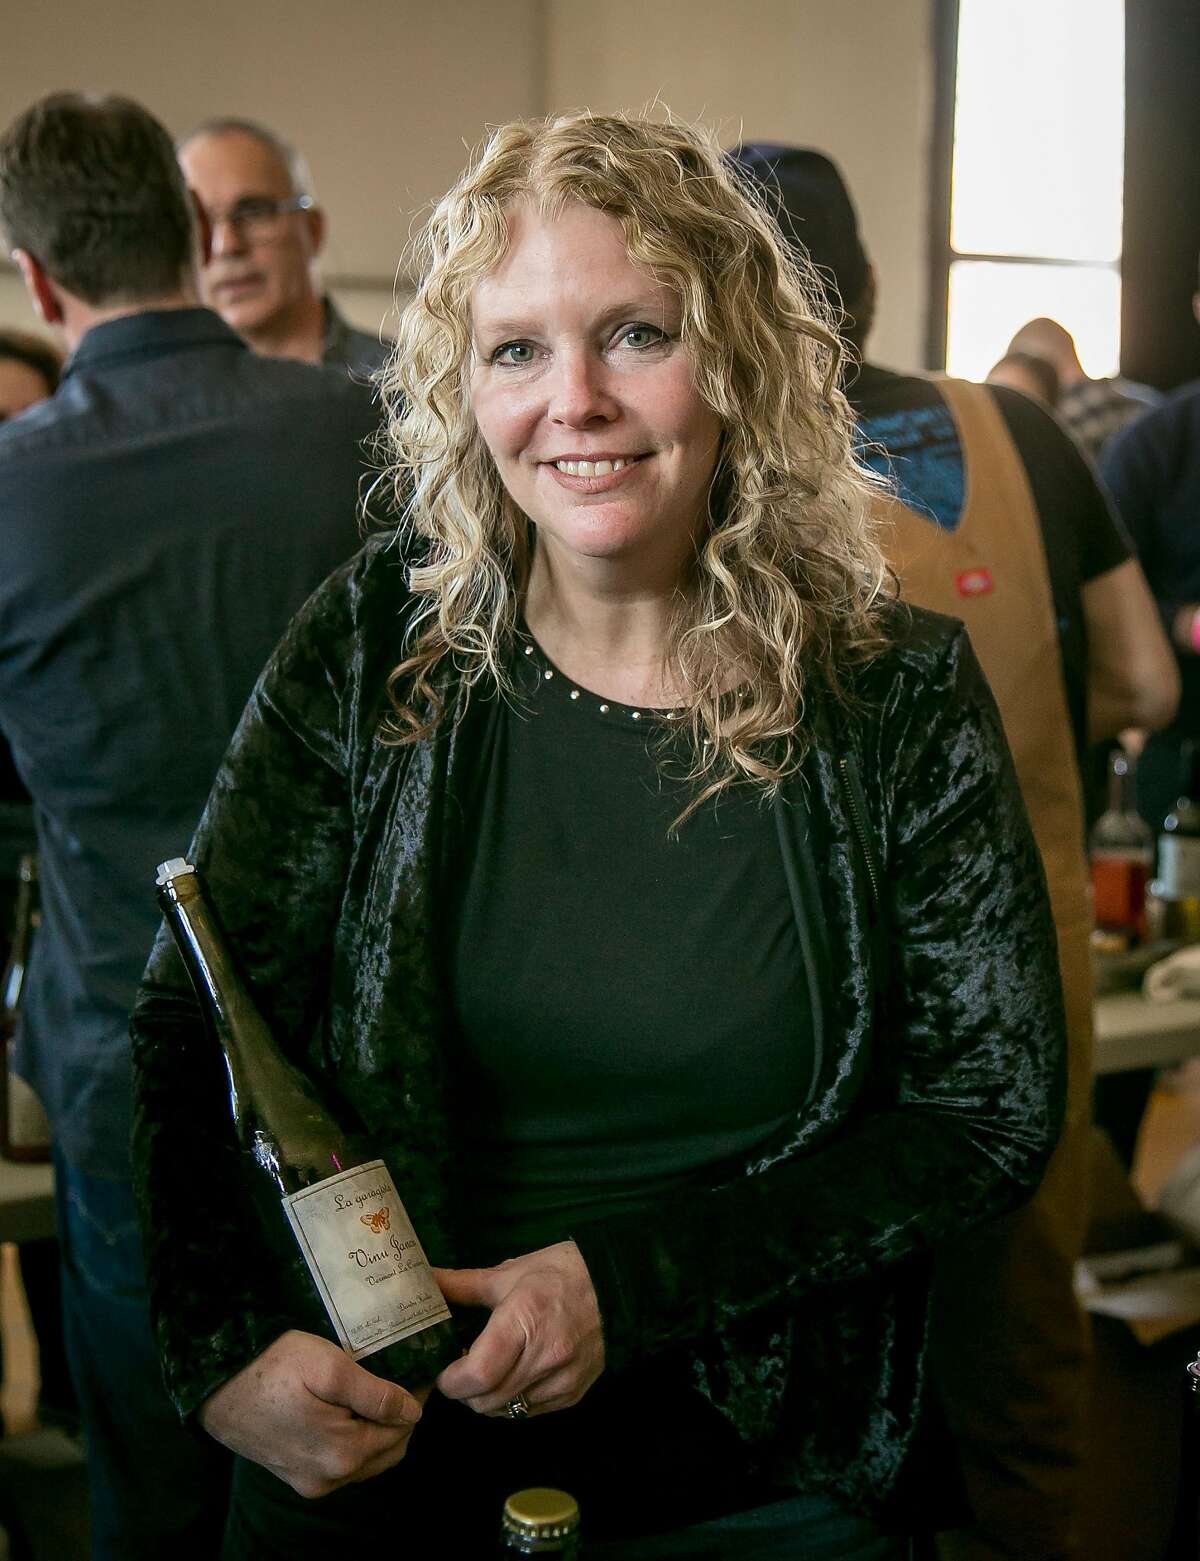 Diedre Heekin of La Garagista winery at a natural wine tasting in the Starline Social Club in Oakland, Calif. on March 11th, 2018.